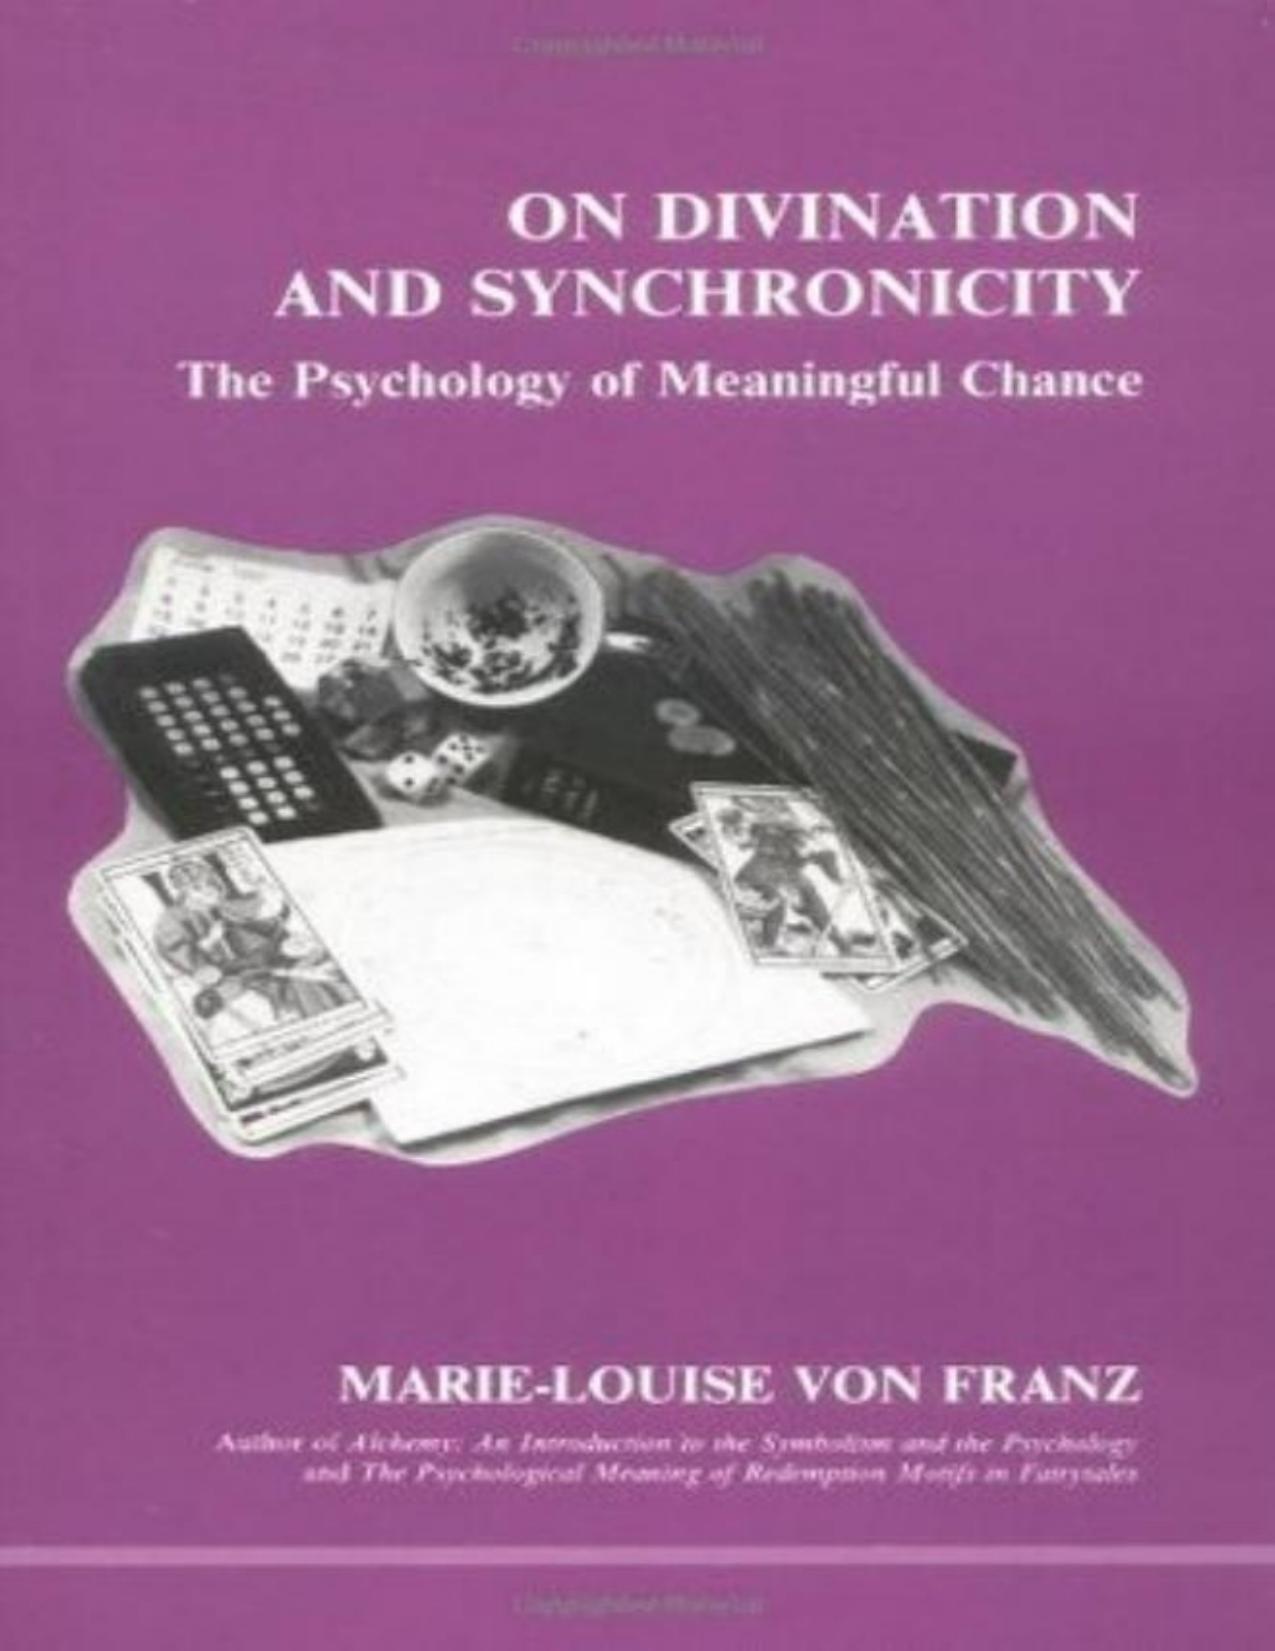 On Divination & Synchronicity: The Psychology of Meaningful Chance by Marie-Louise von Franz